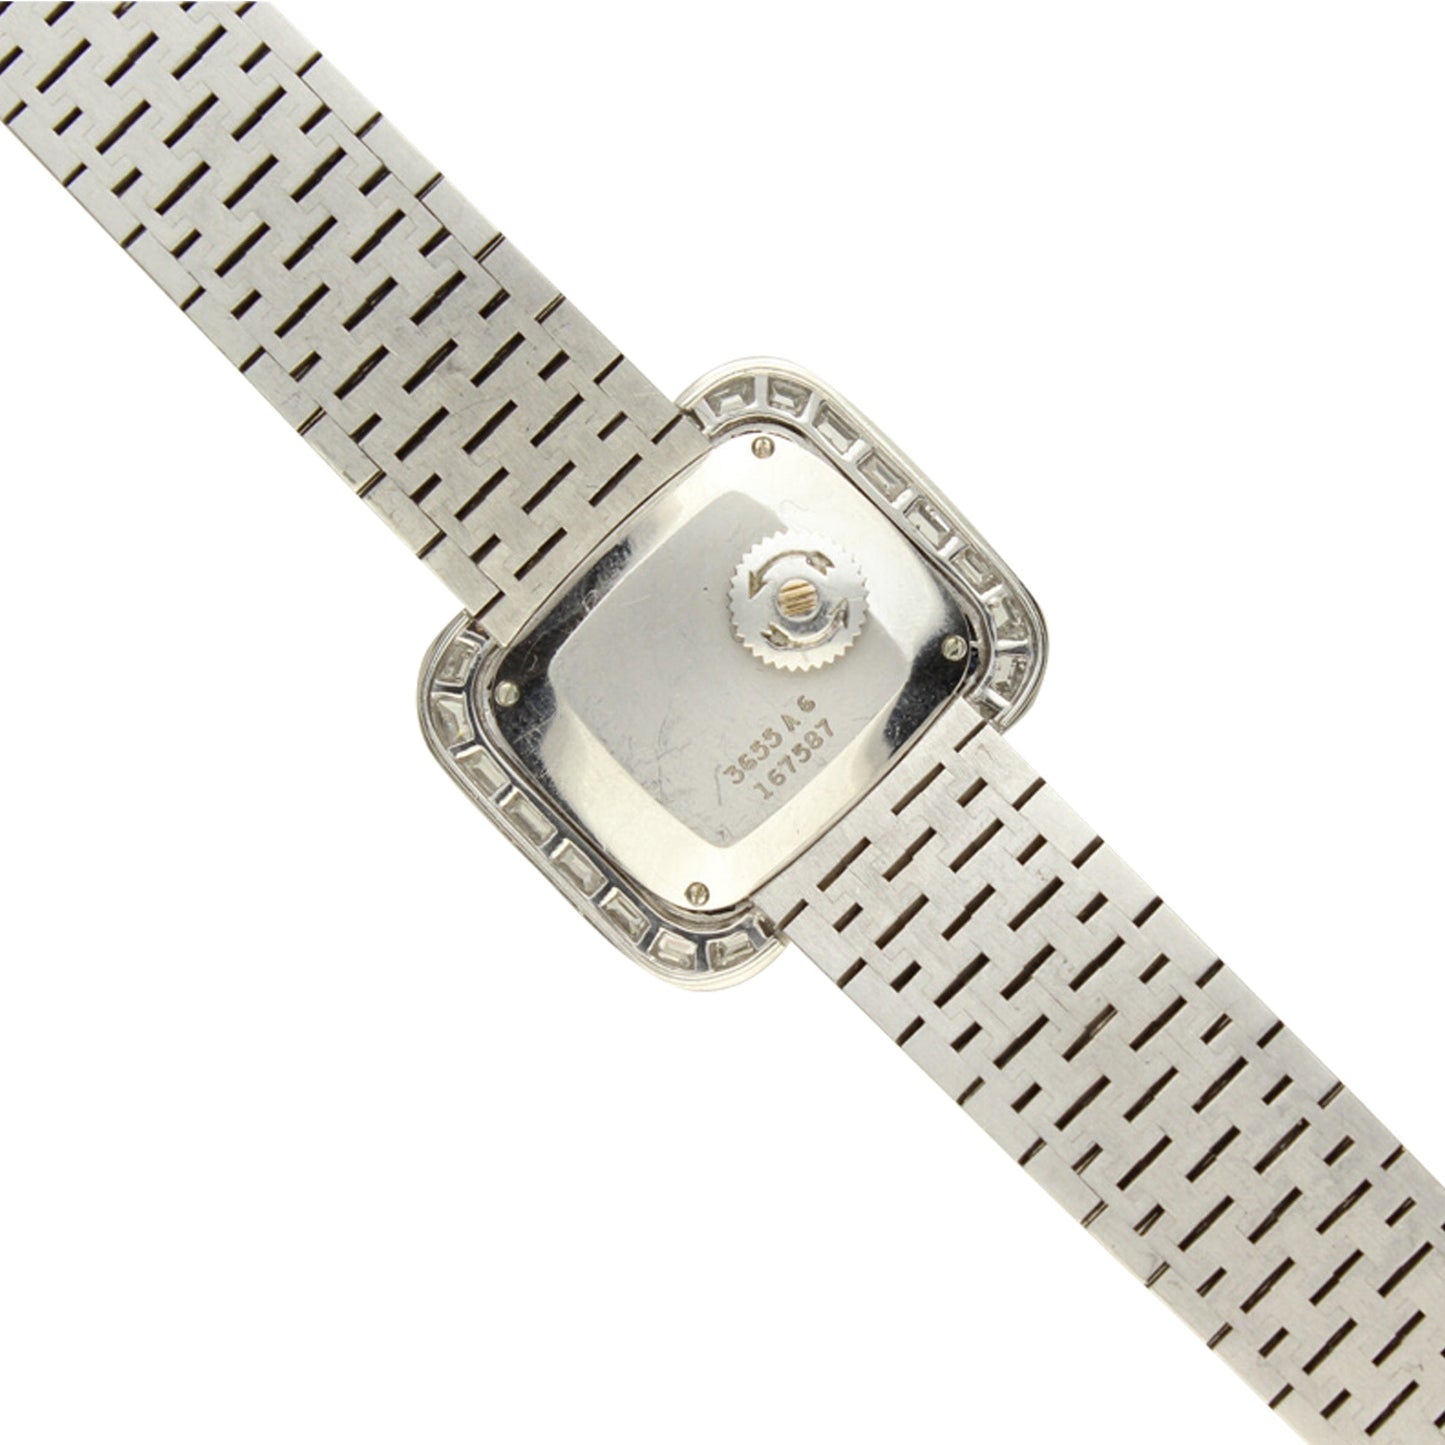 18ct white gold, diamond and sapphire set, reference 3566 bracelet watch. Made 1970's